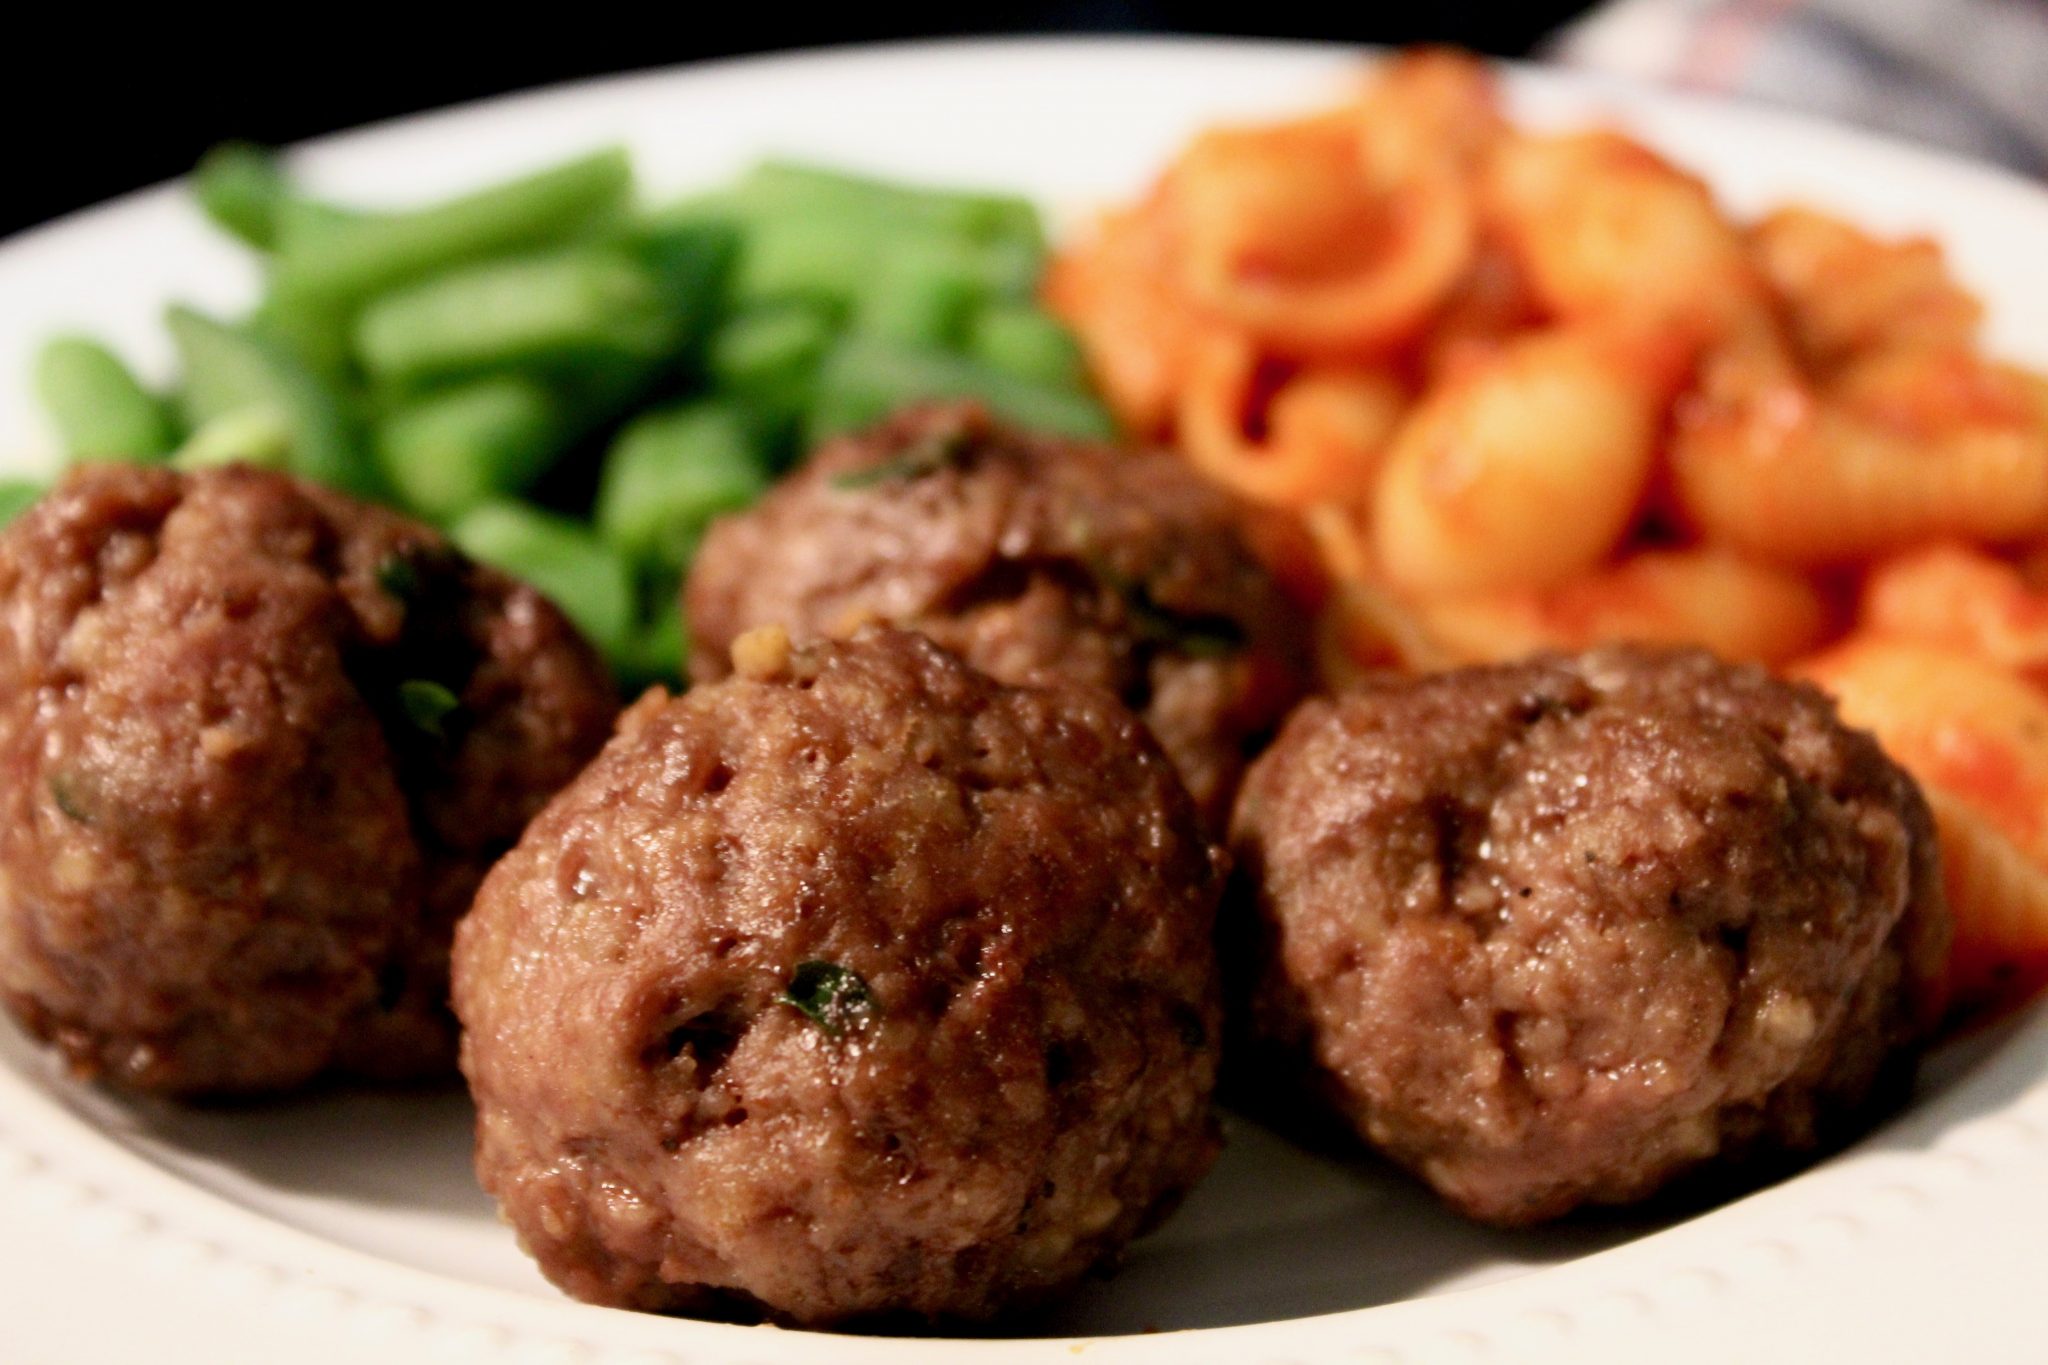 meatballs and vegetables